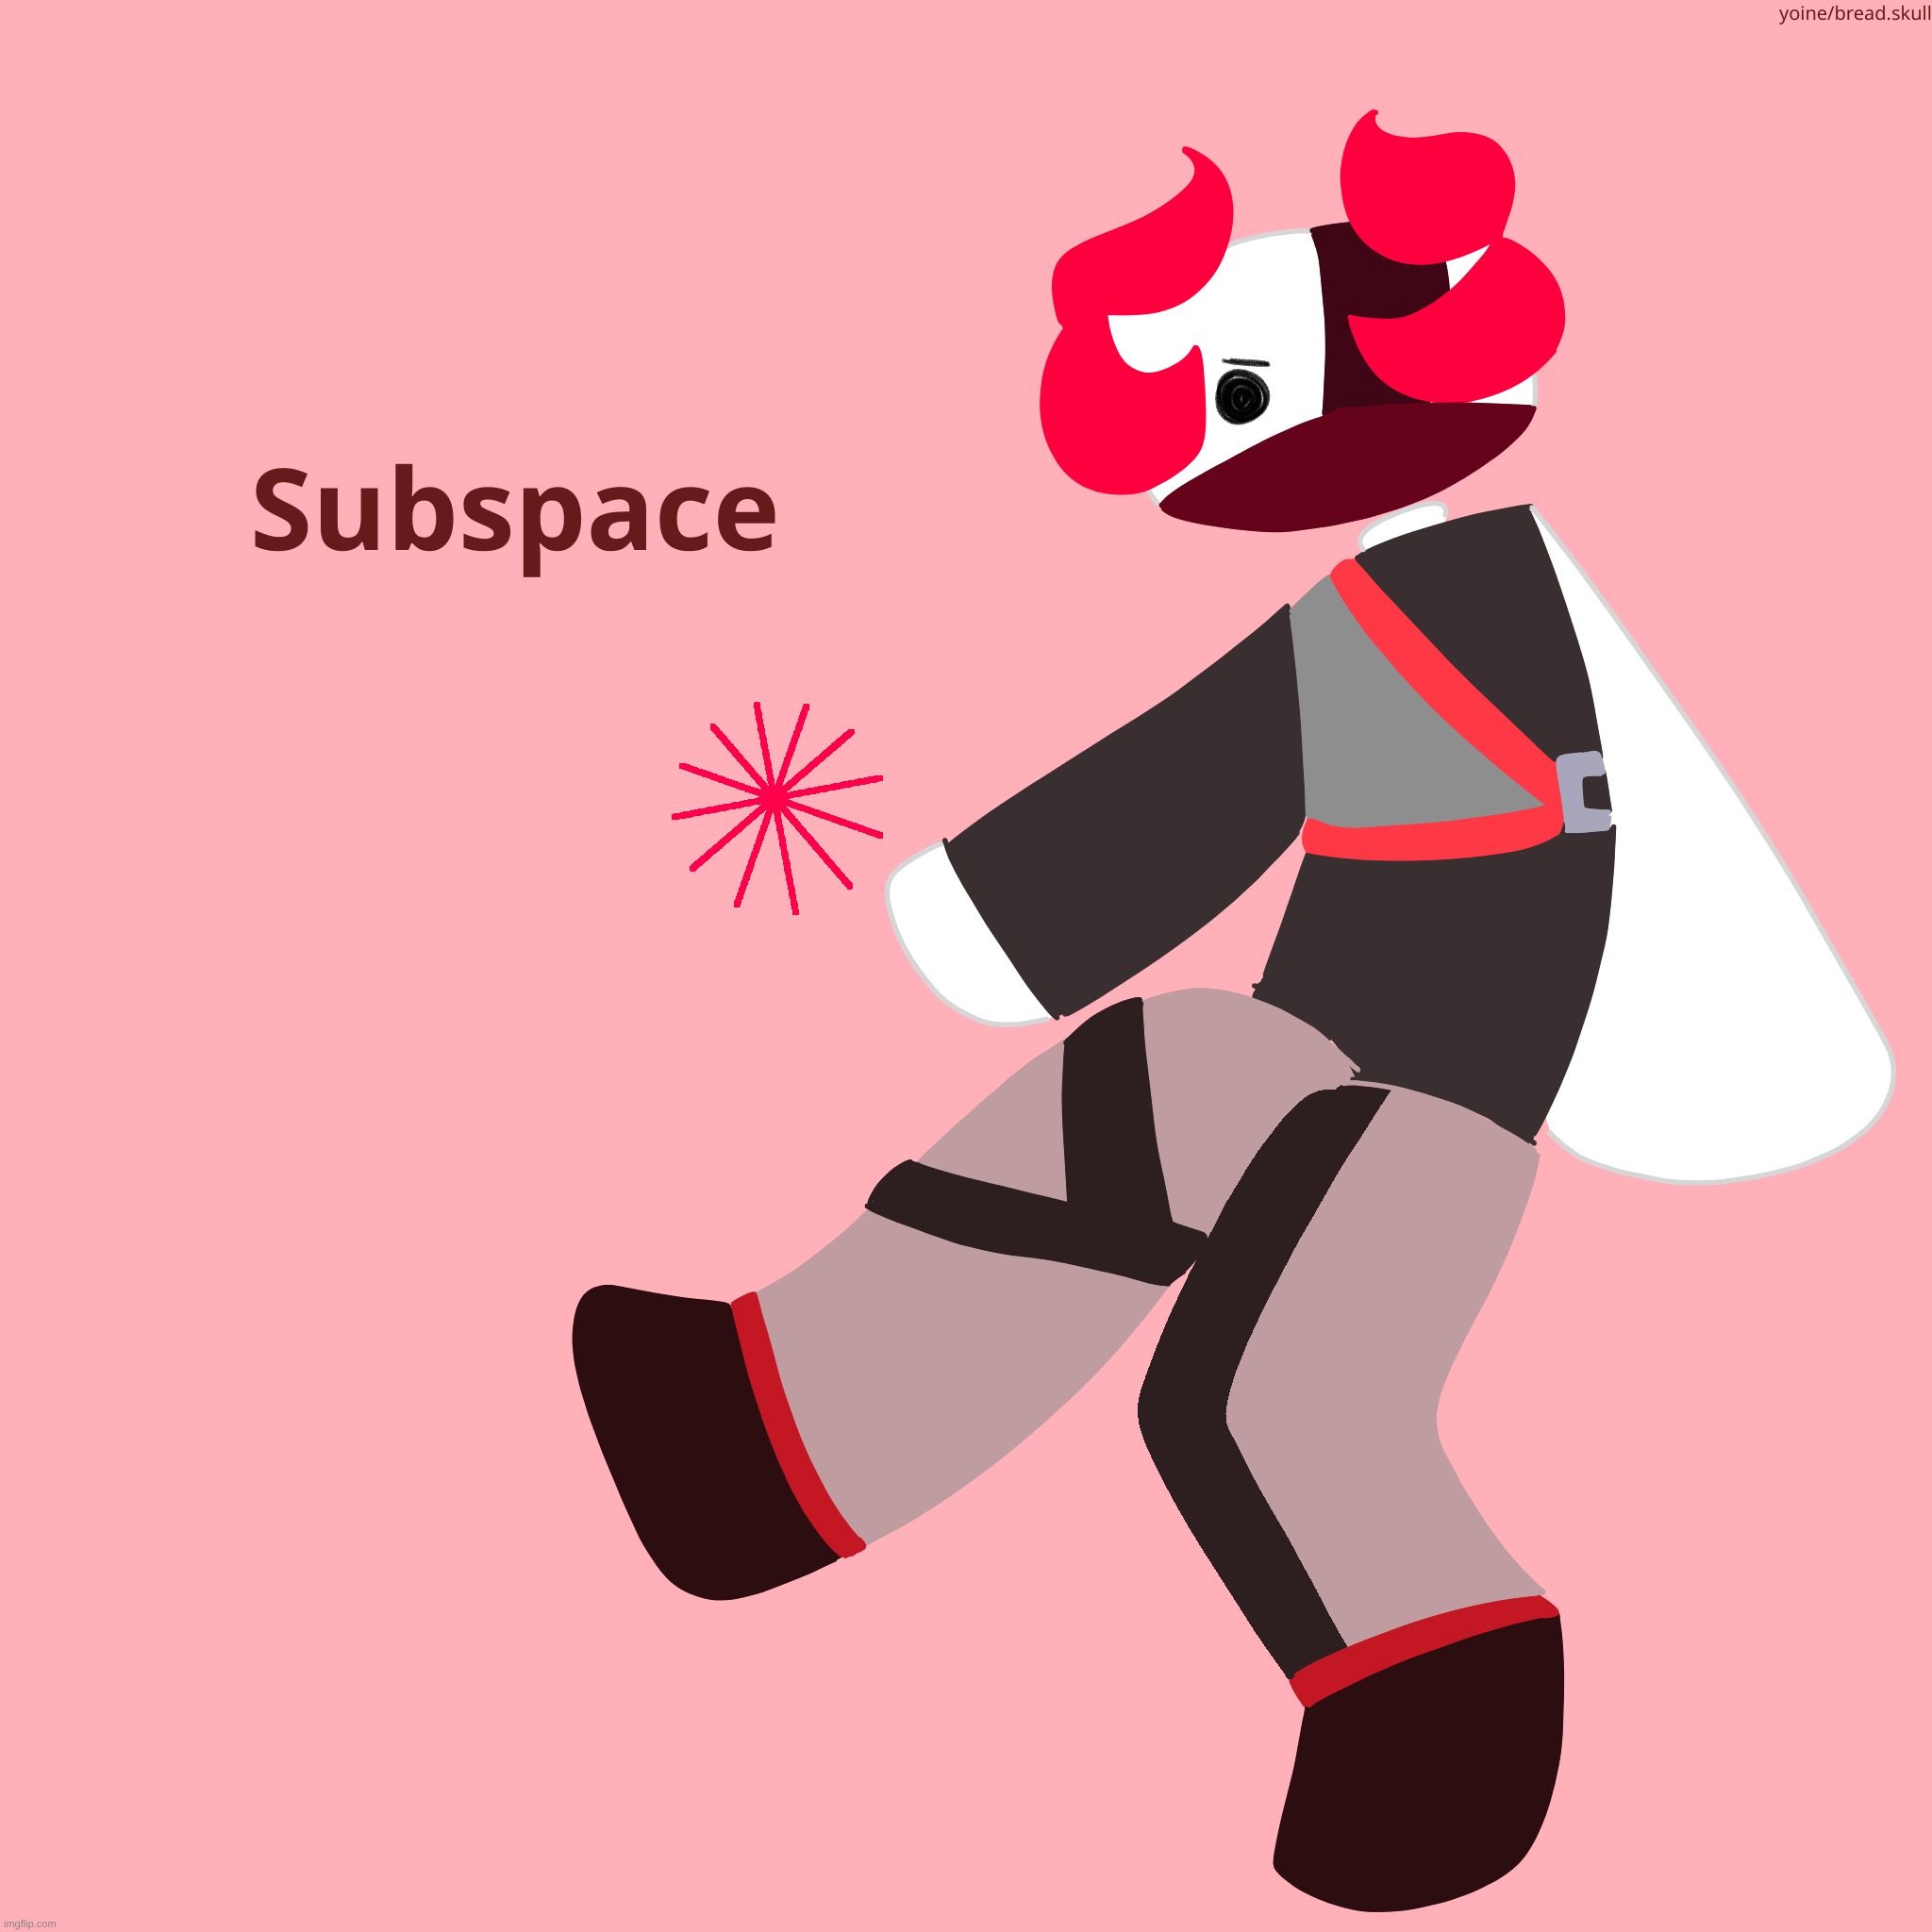 subspace from phighting | made w/ Imgflip meme maker